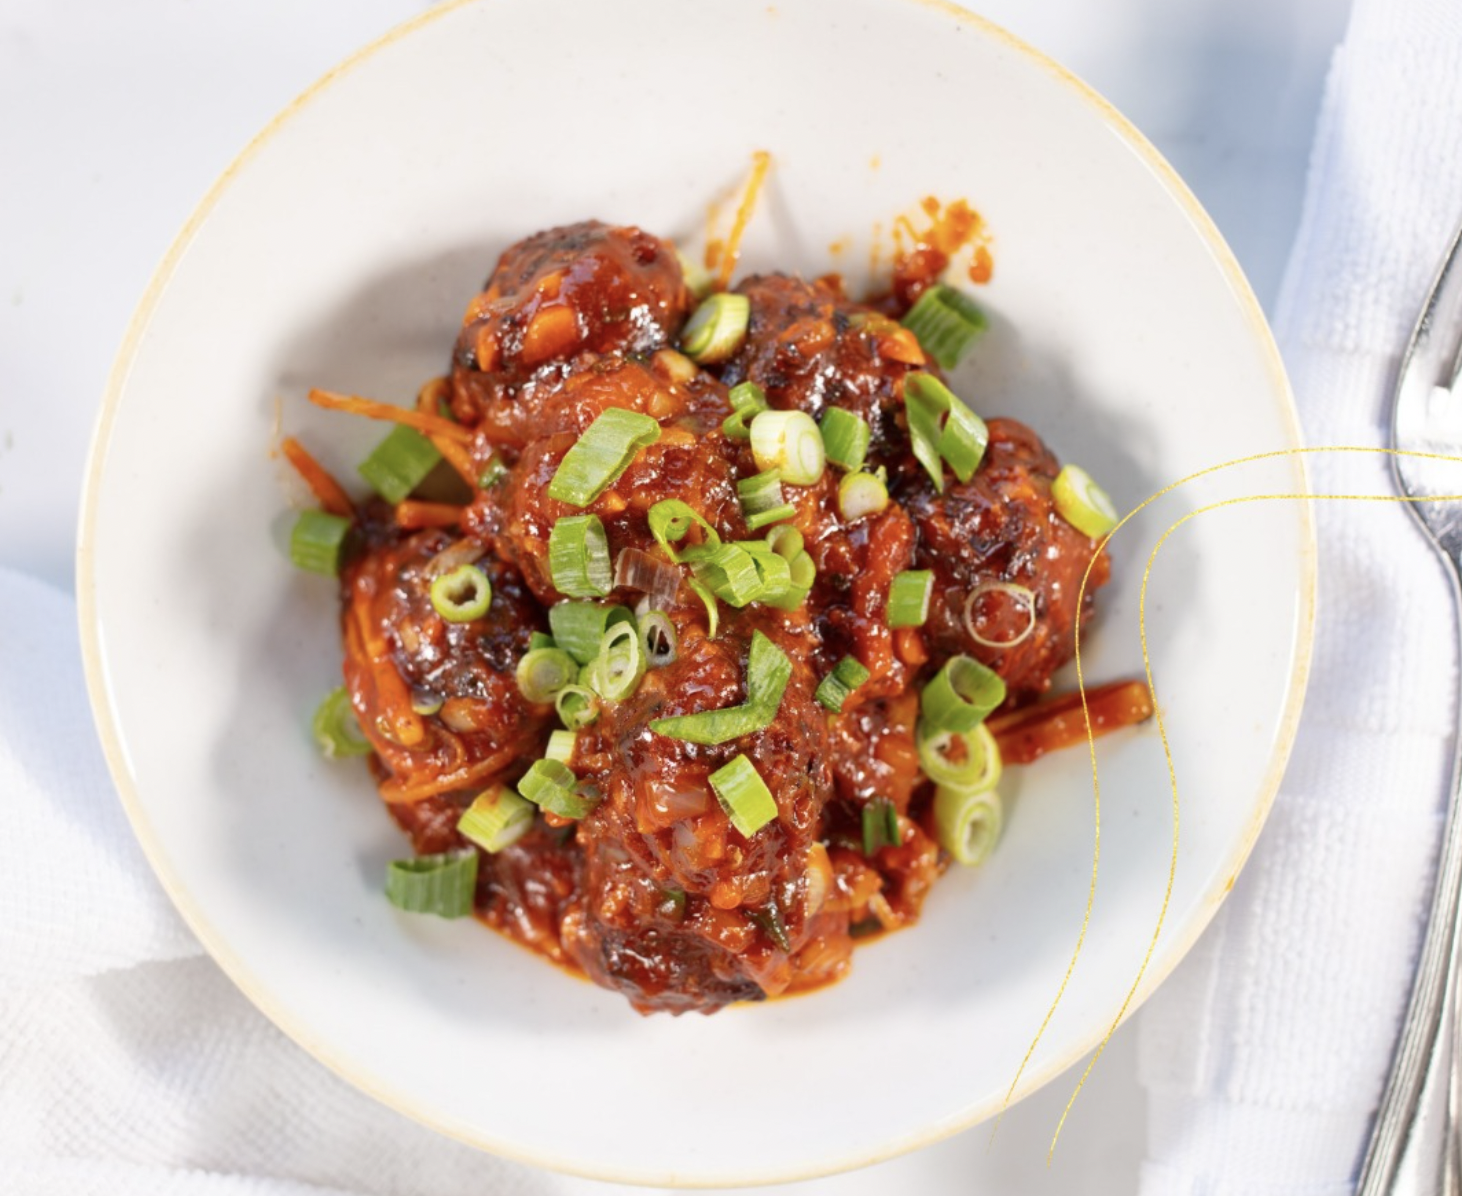 Marigold vegetable manchurian with vegetable balls in a savory sauce